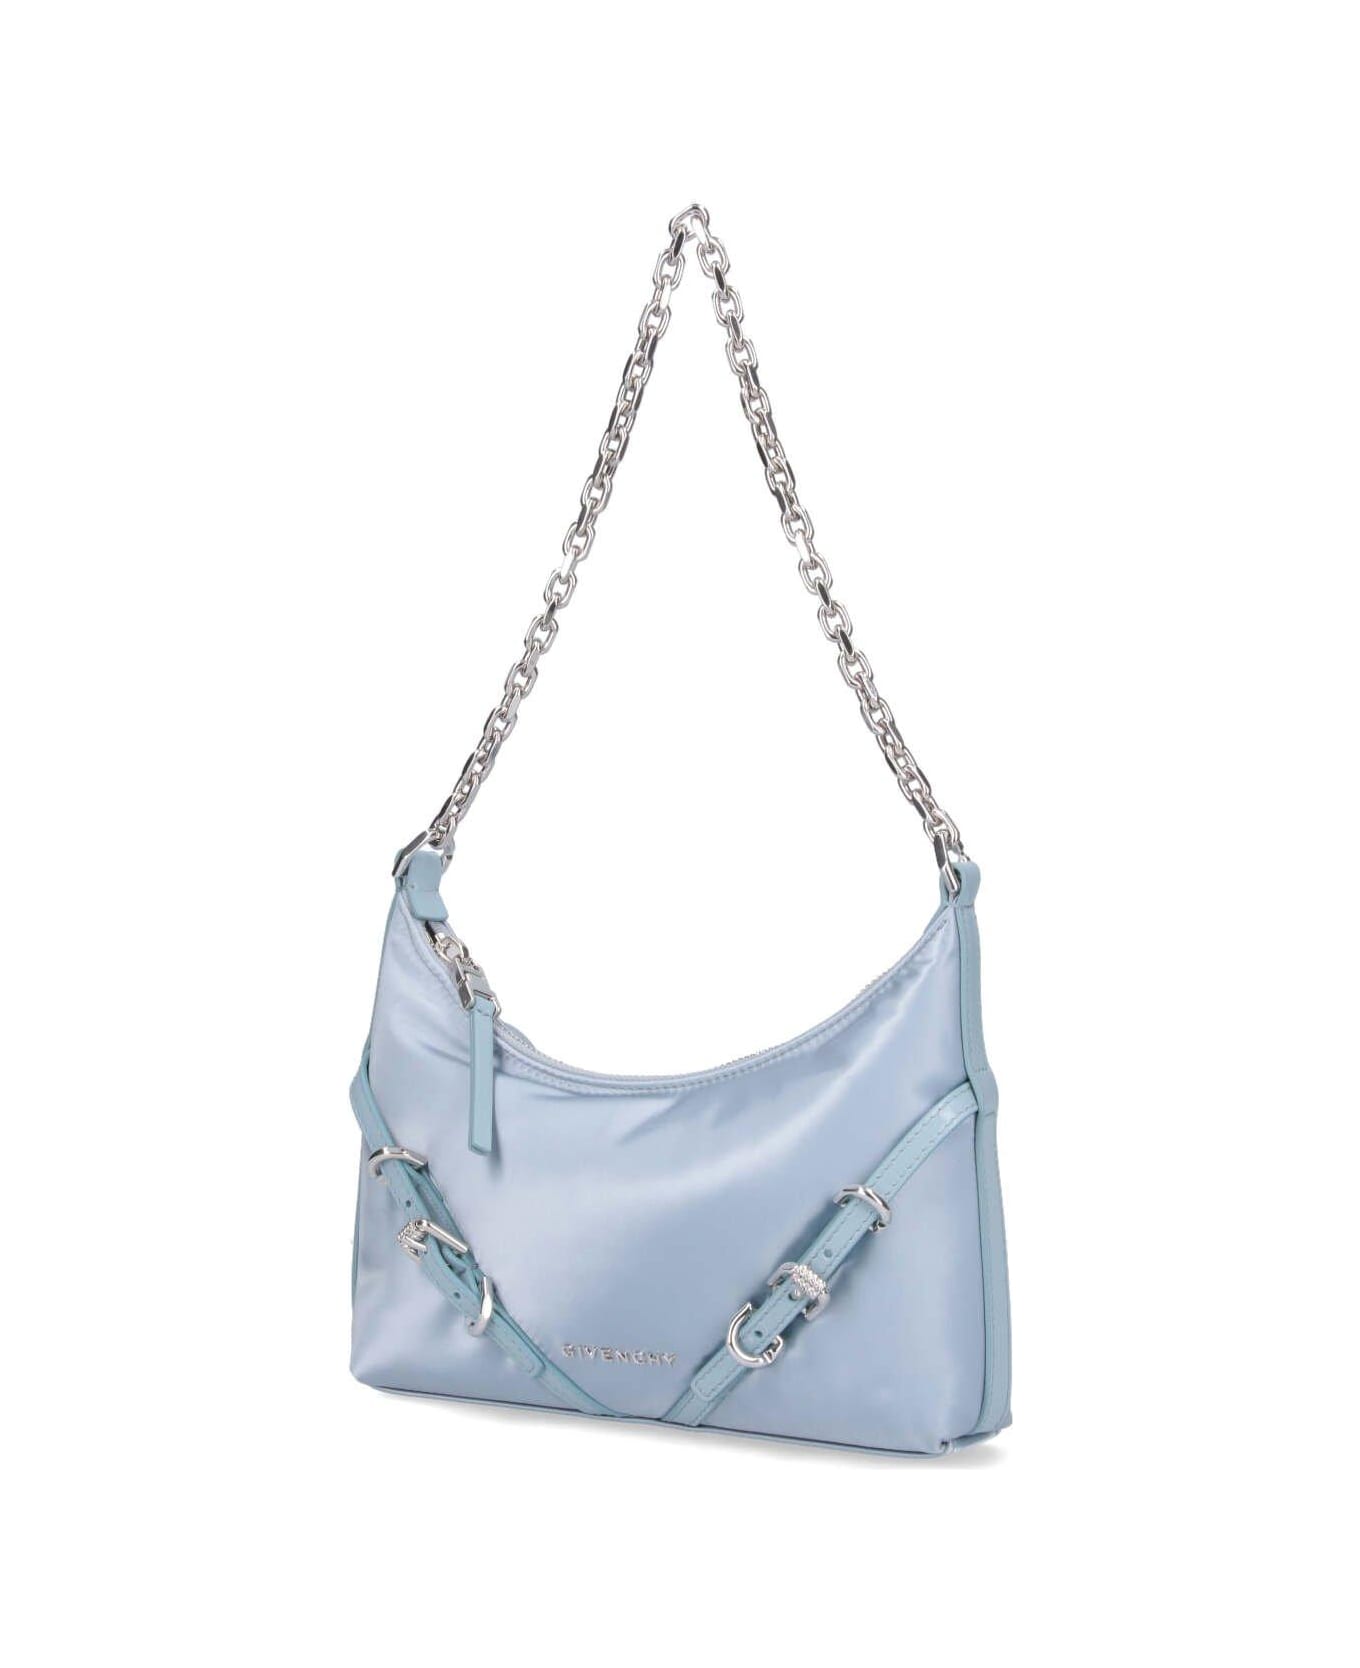 Givenchy Voyou Party Buckle Detailed Shoulder Bag - BABY BLUE